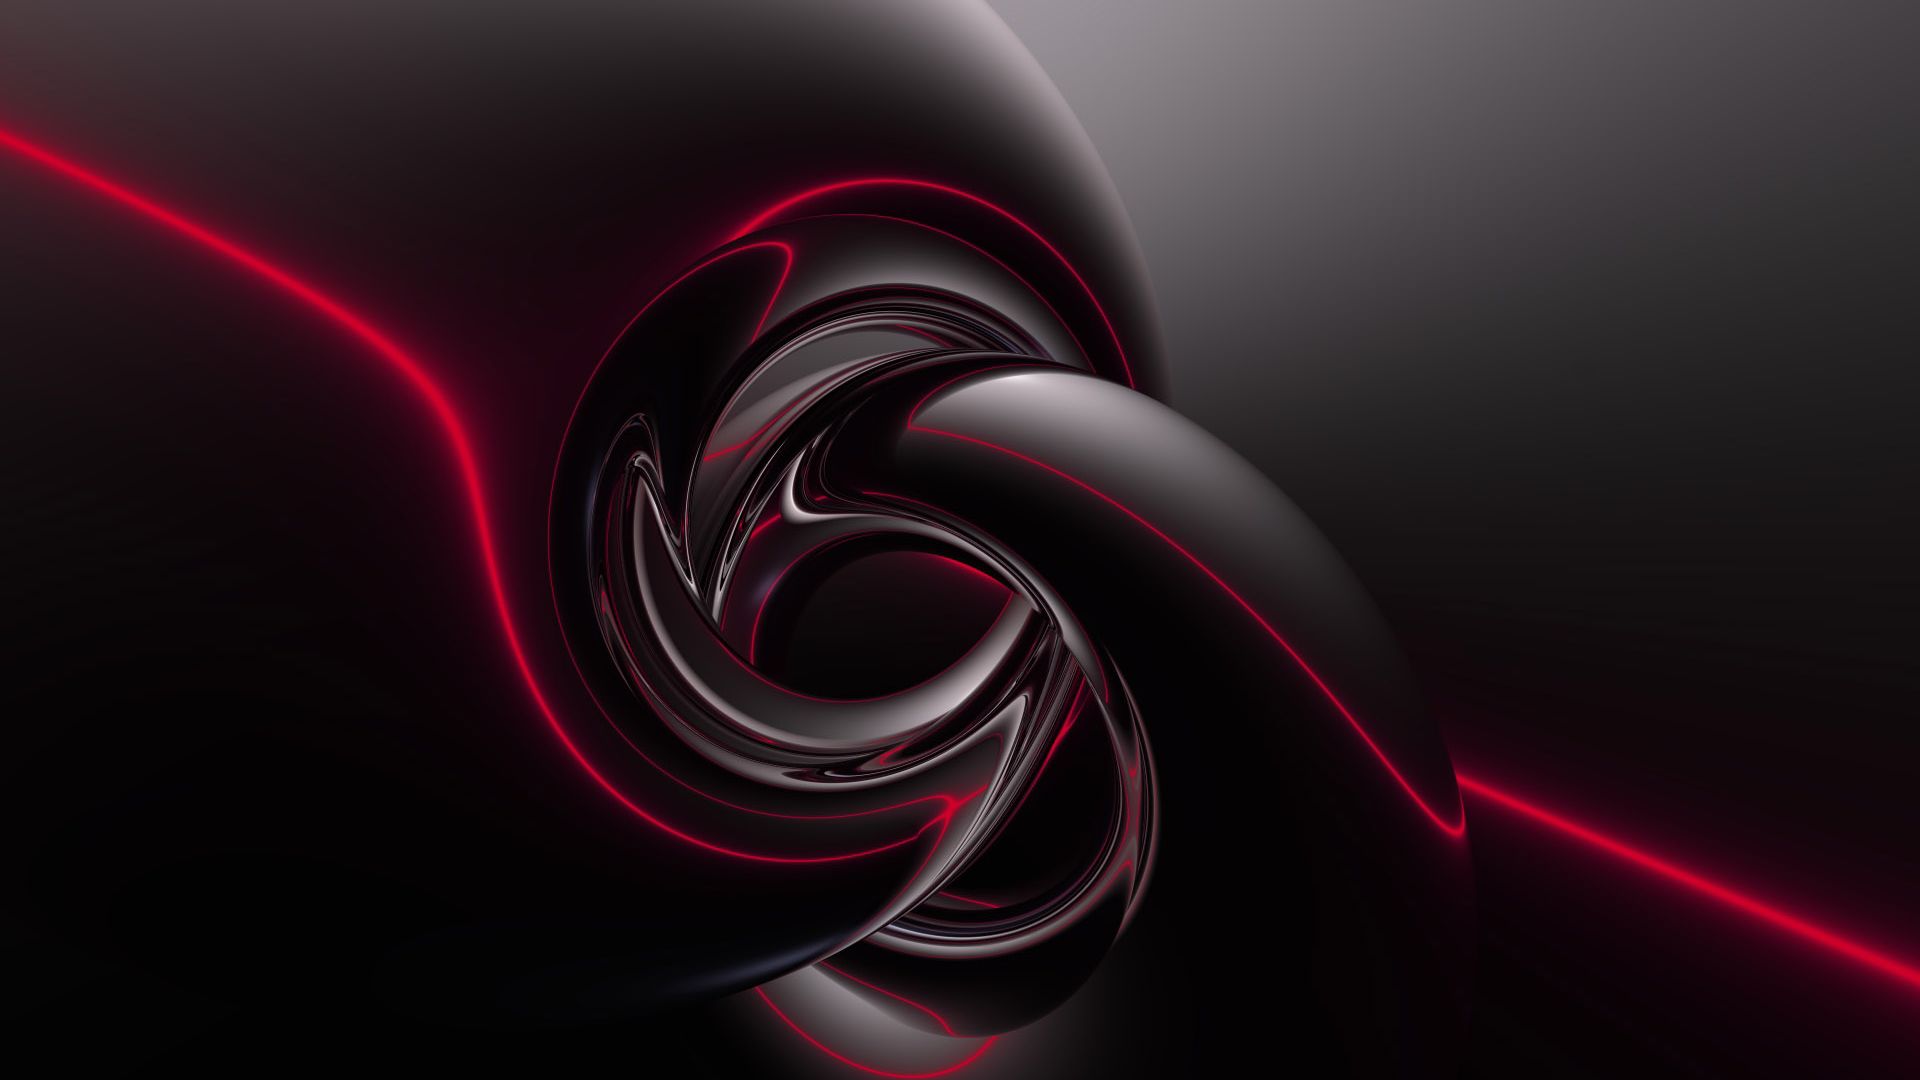 3d Wallpaper Black And Red Image Num 22